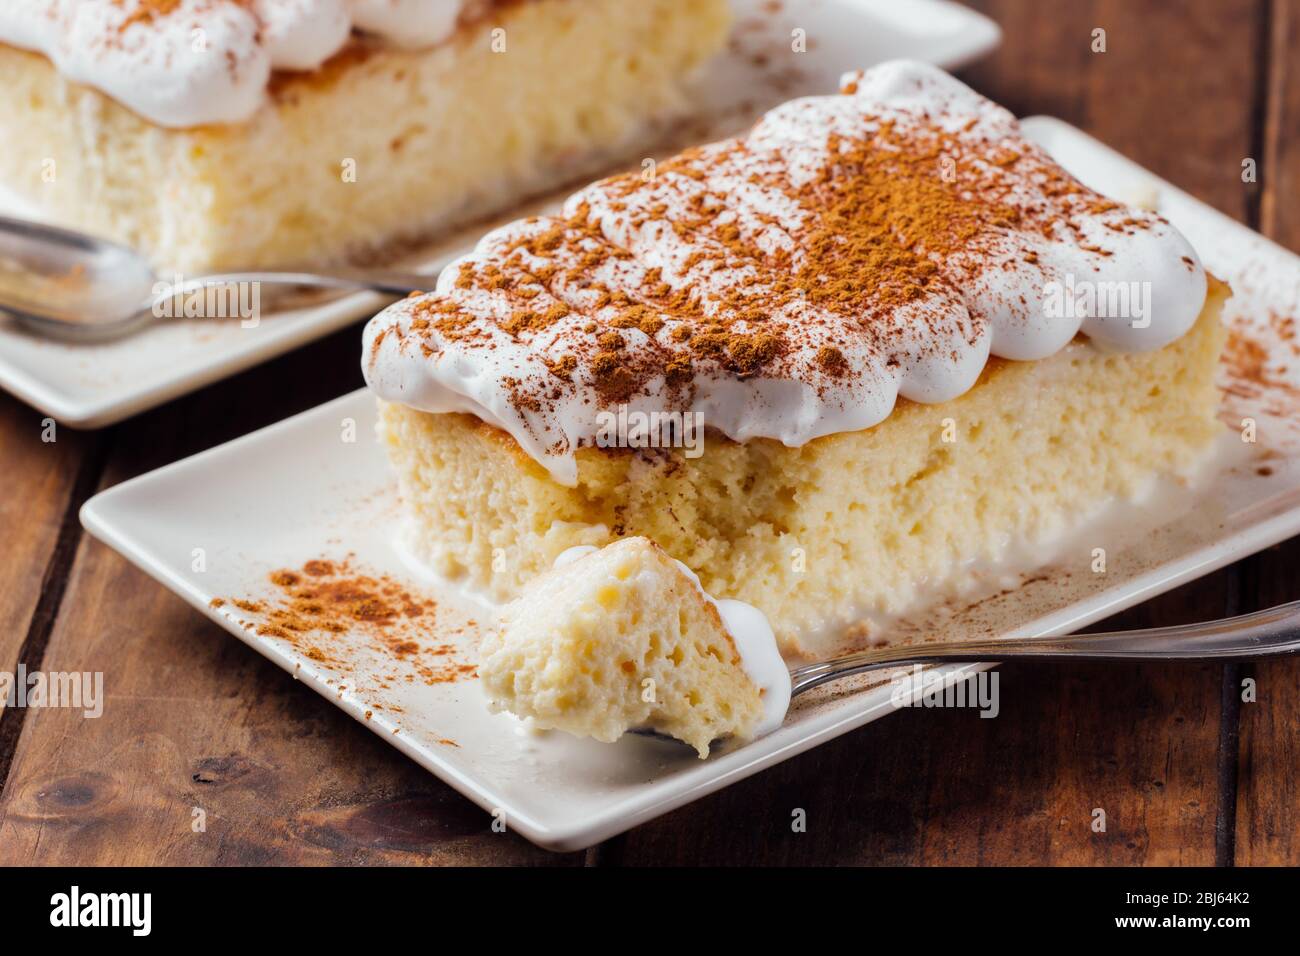 Two pieces of a delicious three milk cake dessert on a wooden background Stock Photo